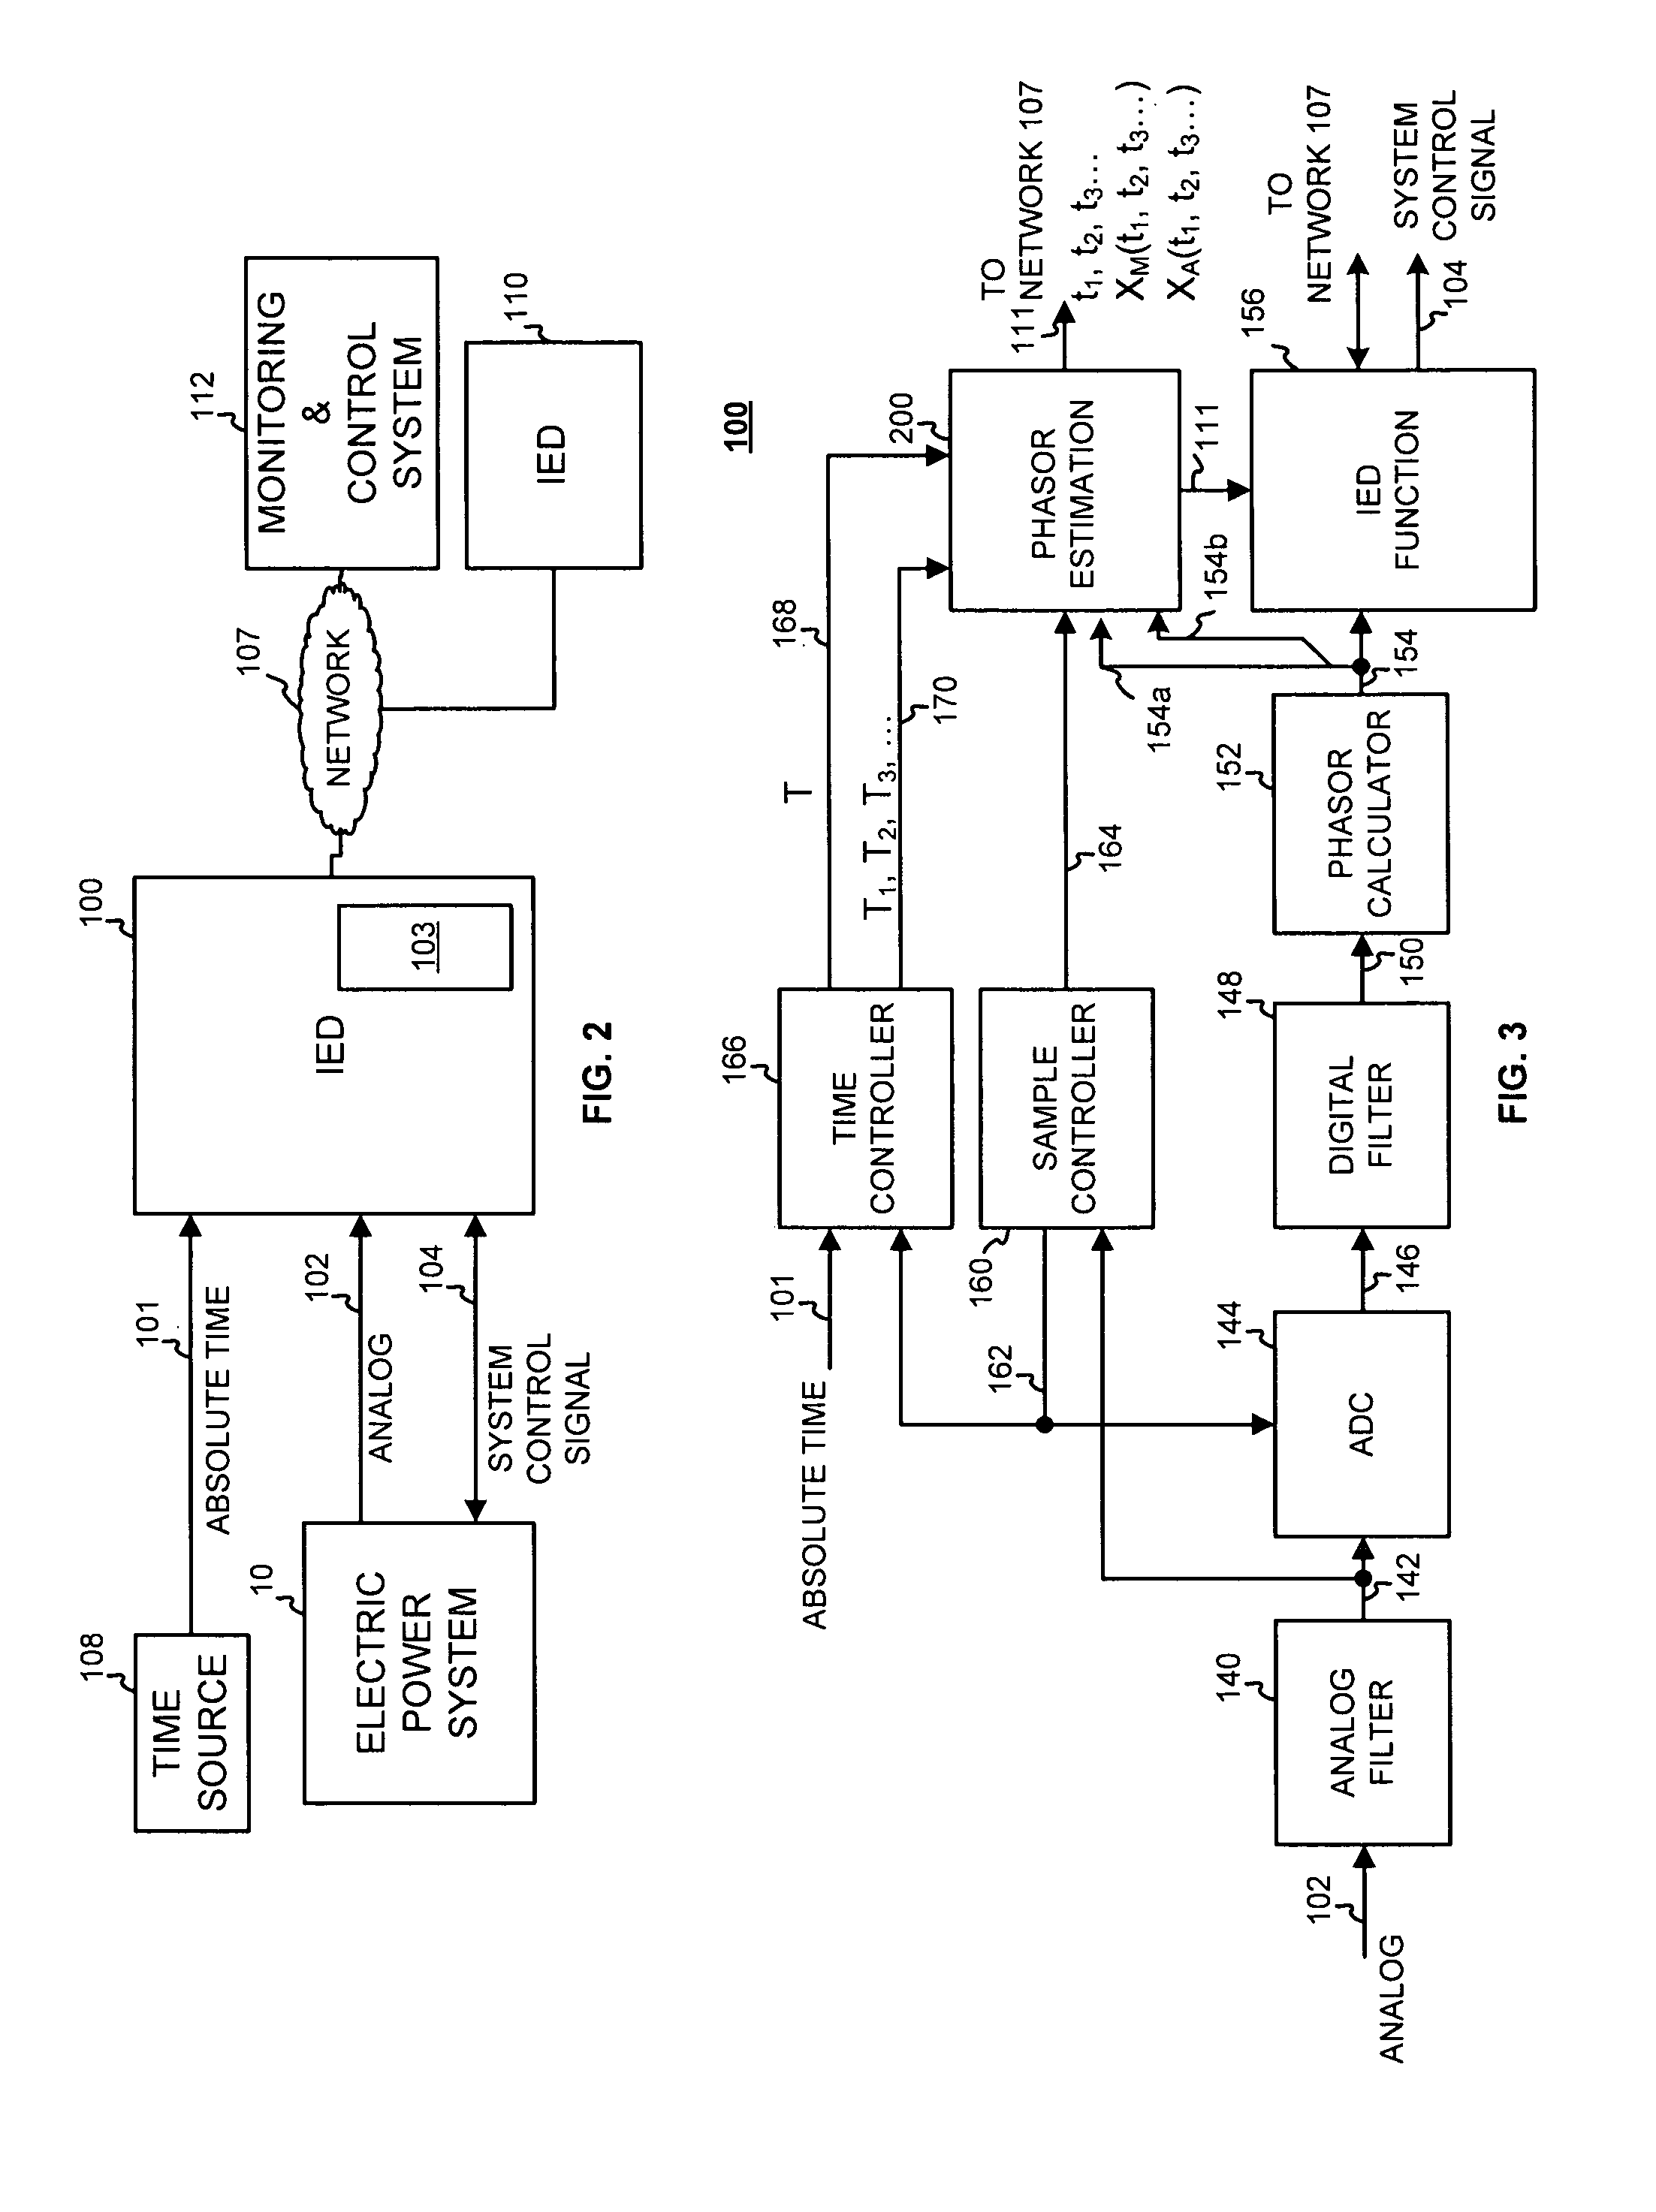 Apparatus and method for estimating synchronized phasors at predetermined times referenced to an absolute time standard in an electrical system